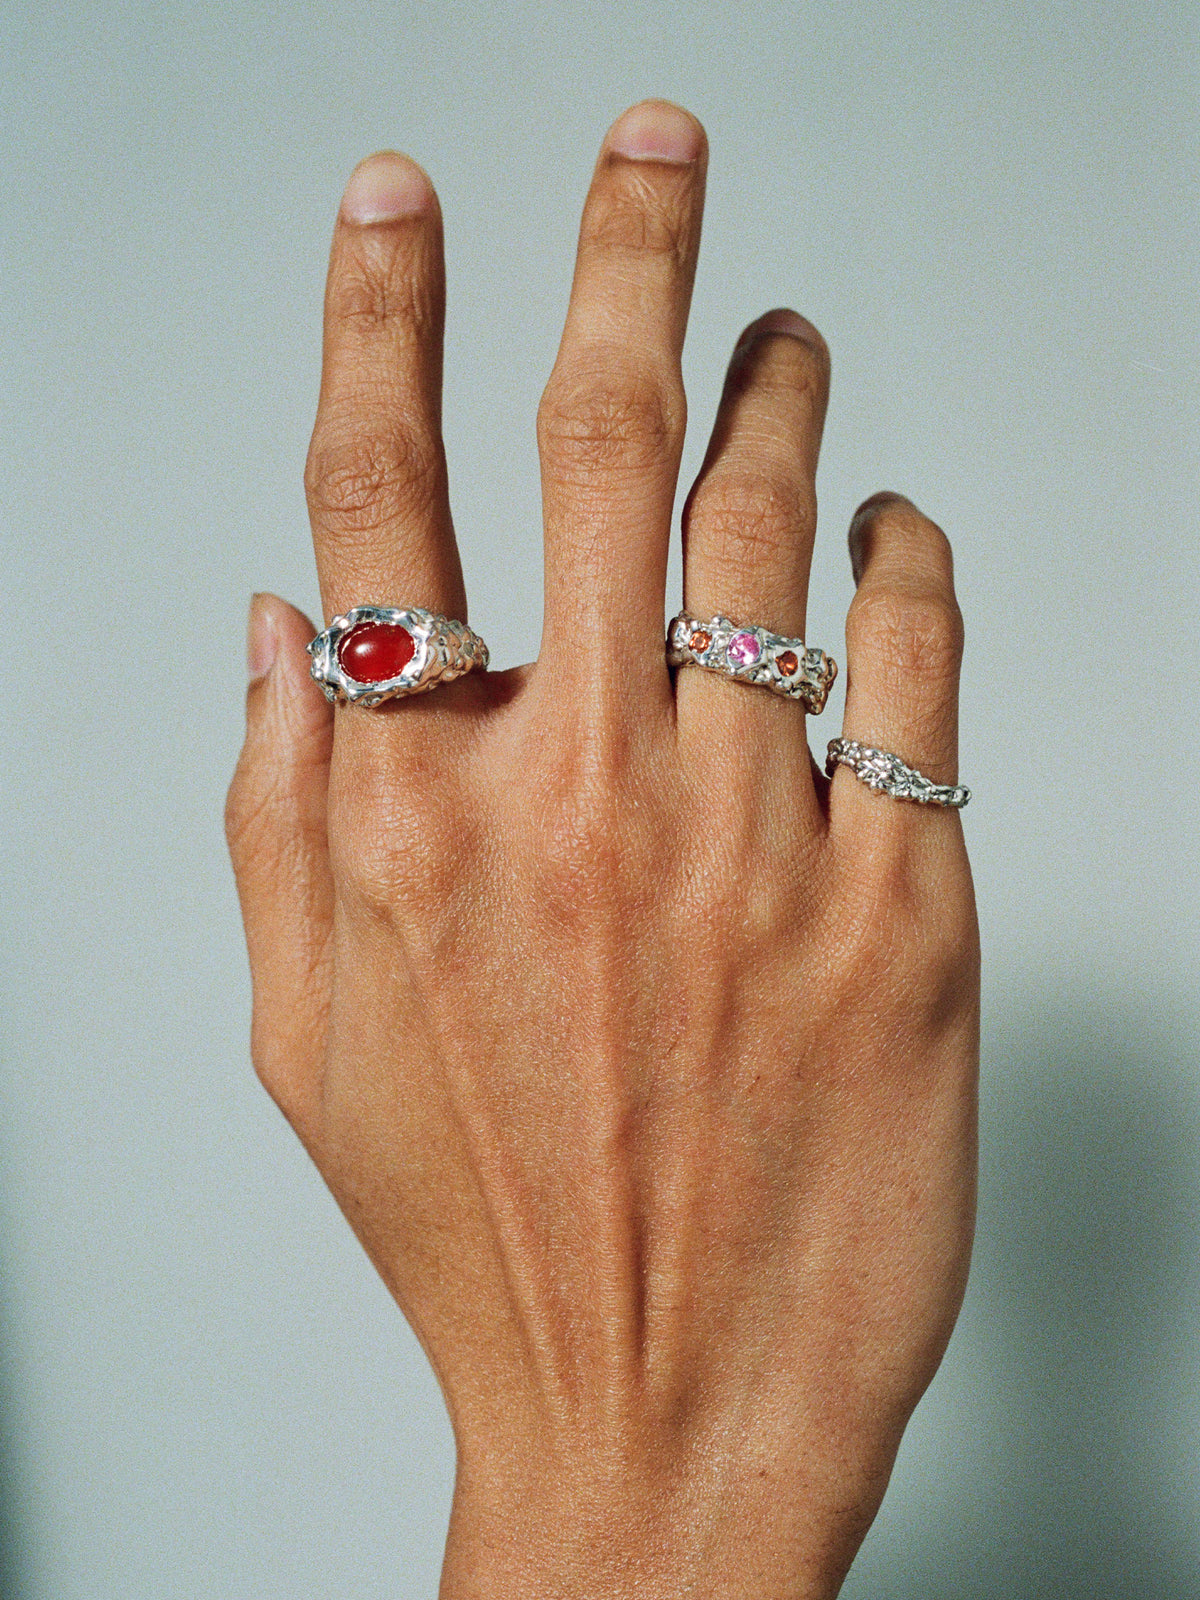 FARIS ROCA GEM Band in sterling silver with lab-created pink and orange sapphire worn on model. Styled with ROCA EYE Ring in silver with carnelian, and ROCA WAVE Ring in silver